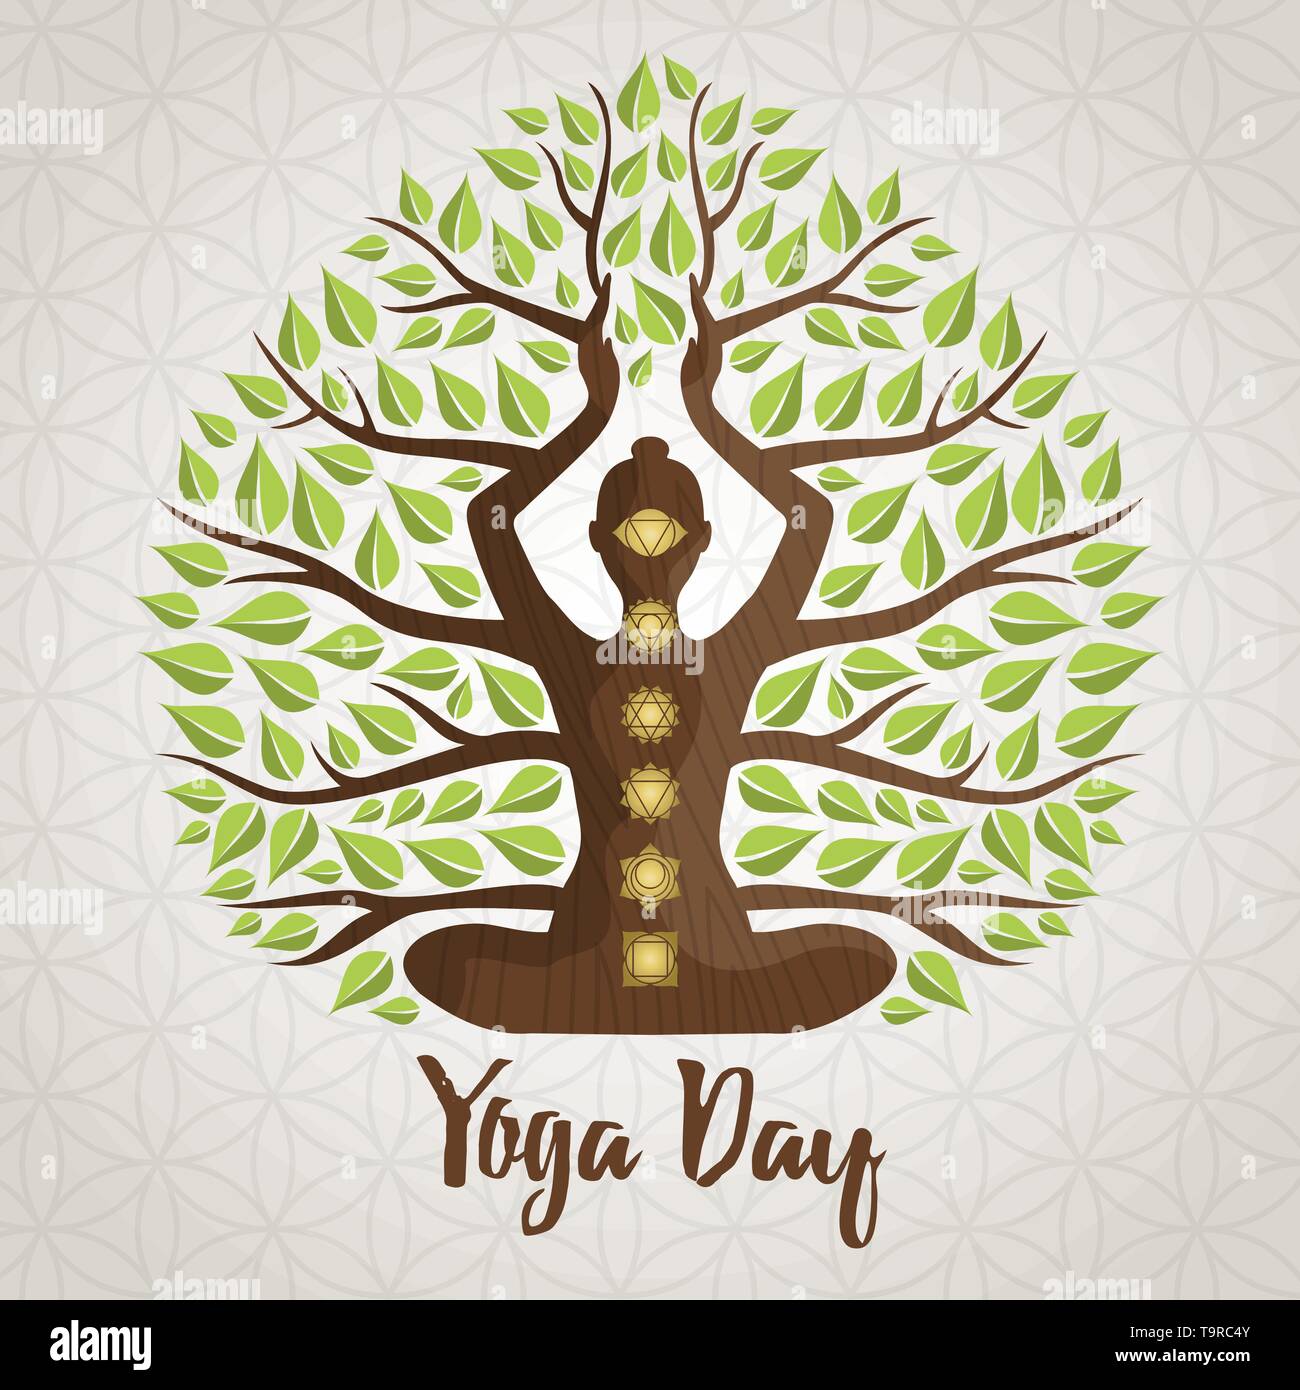 International Yoga Day greeting card illustration of woman silhouette, chakra icons and tree leaves for nature connection concept. Stock Vector